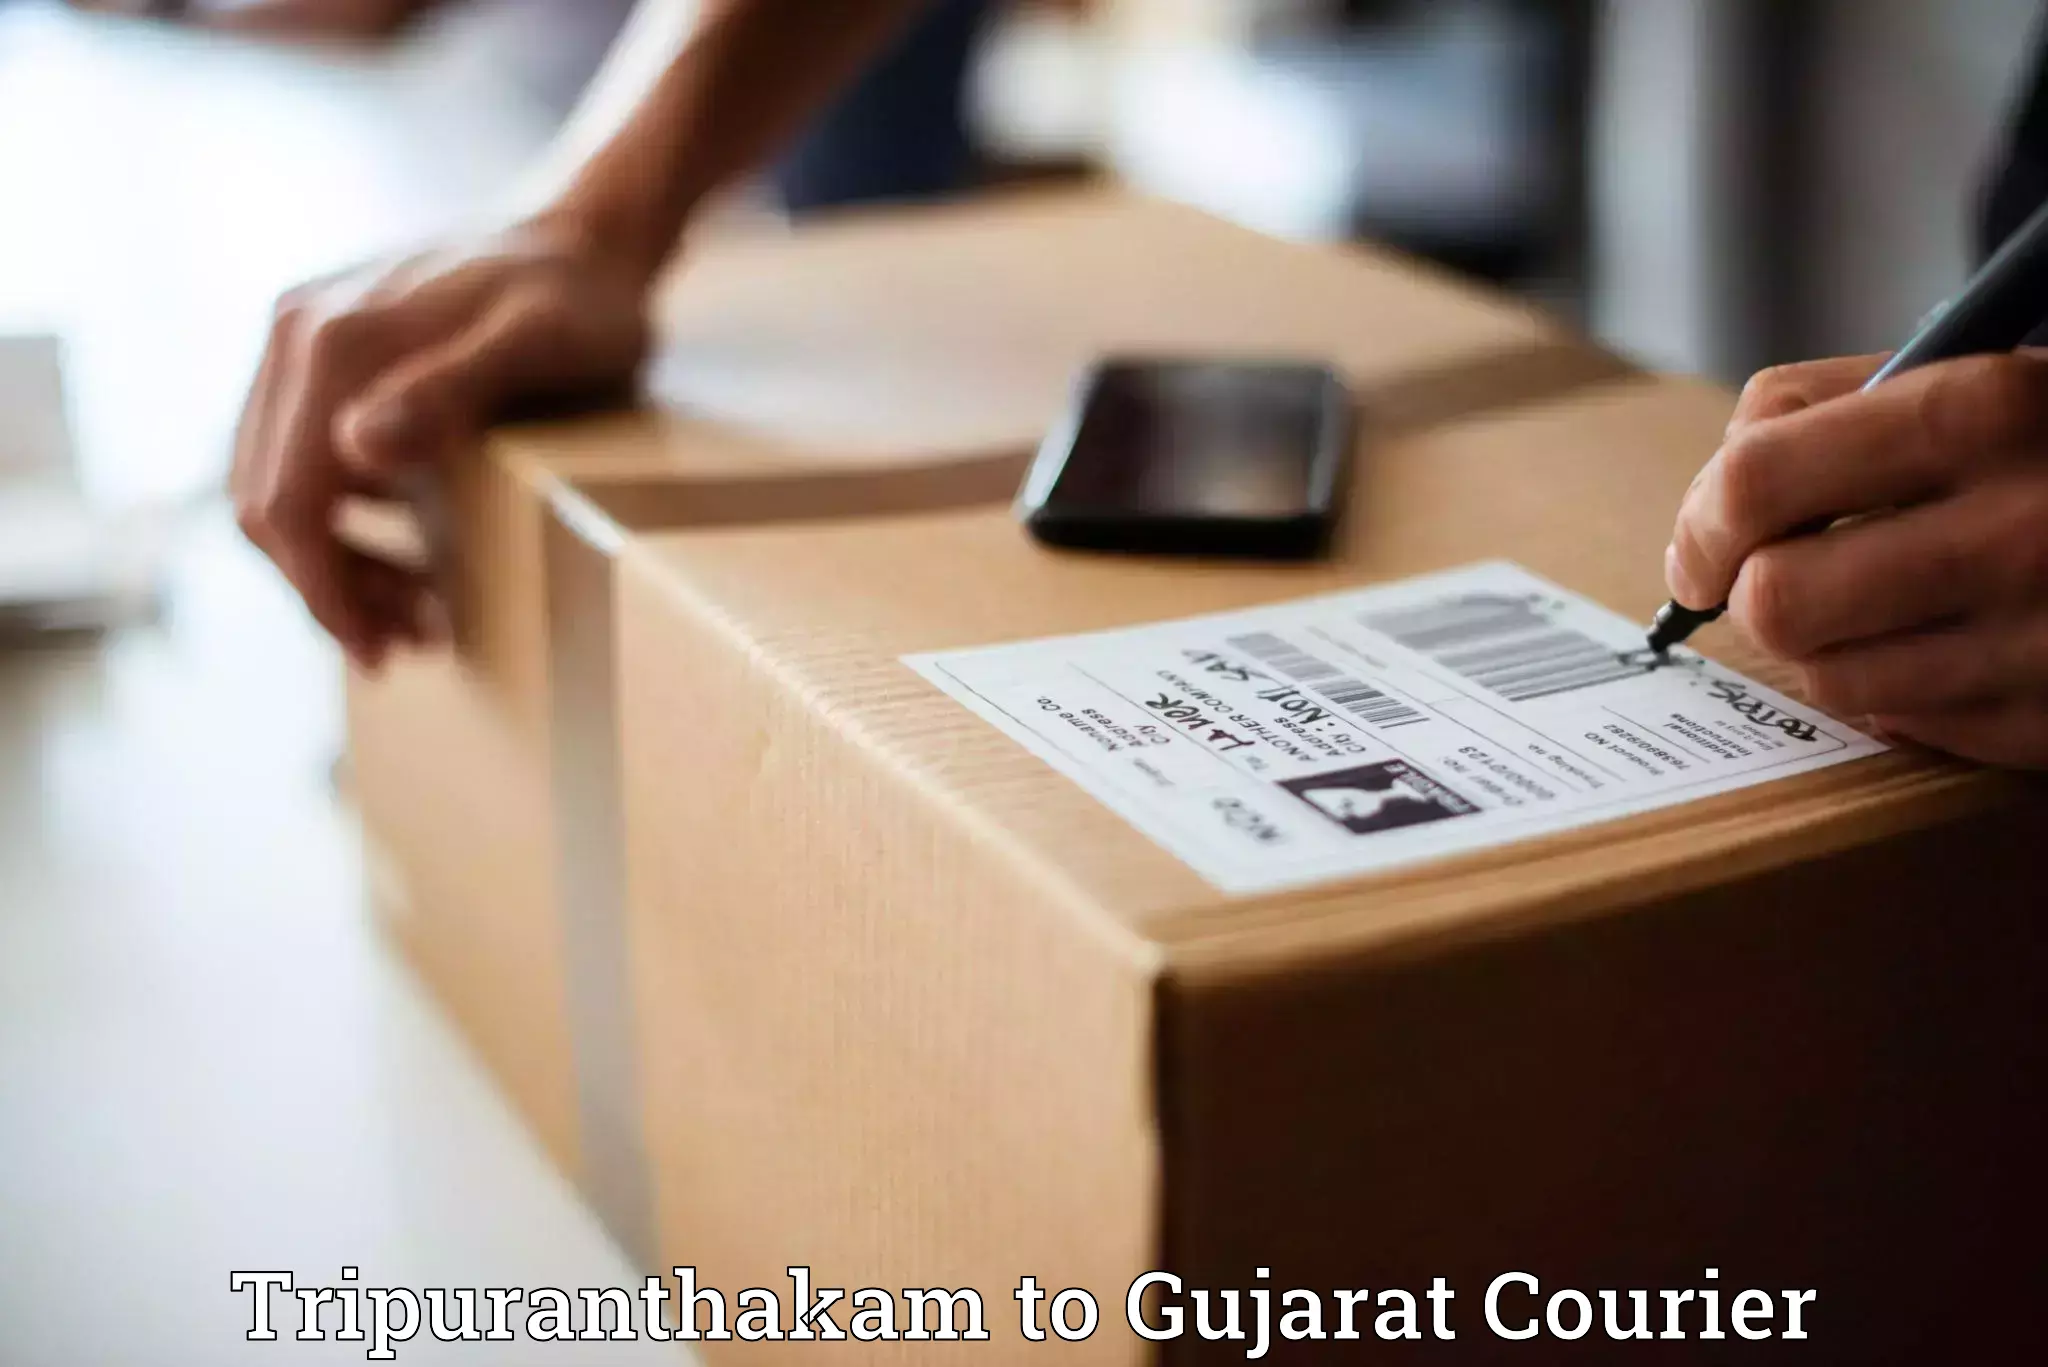 Large-scale shipping solutions Tripuranthakam to Mehsana